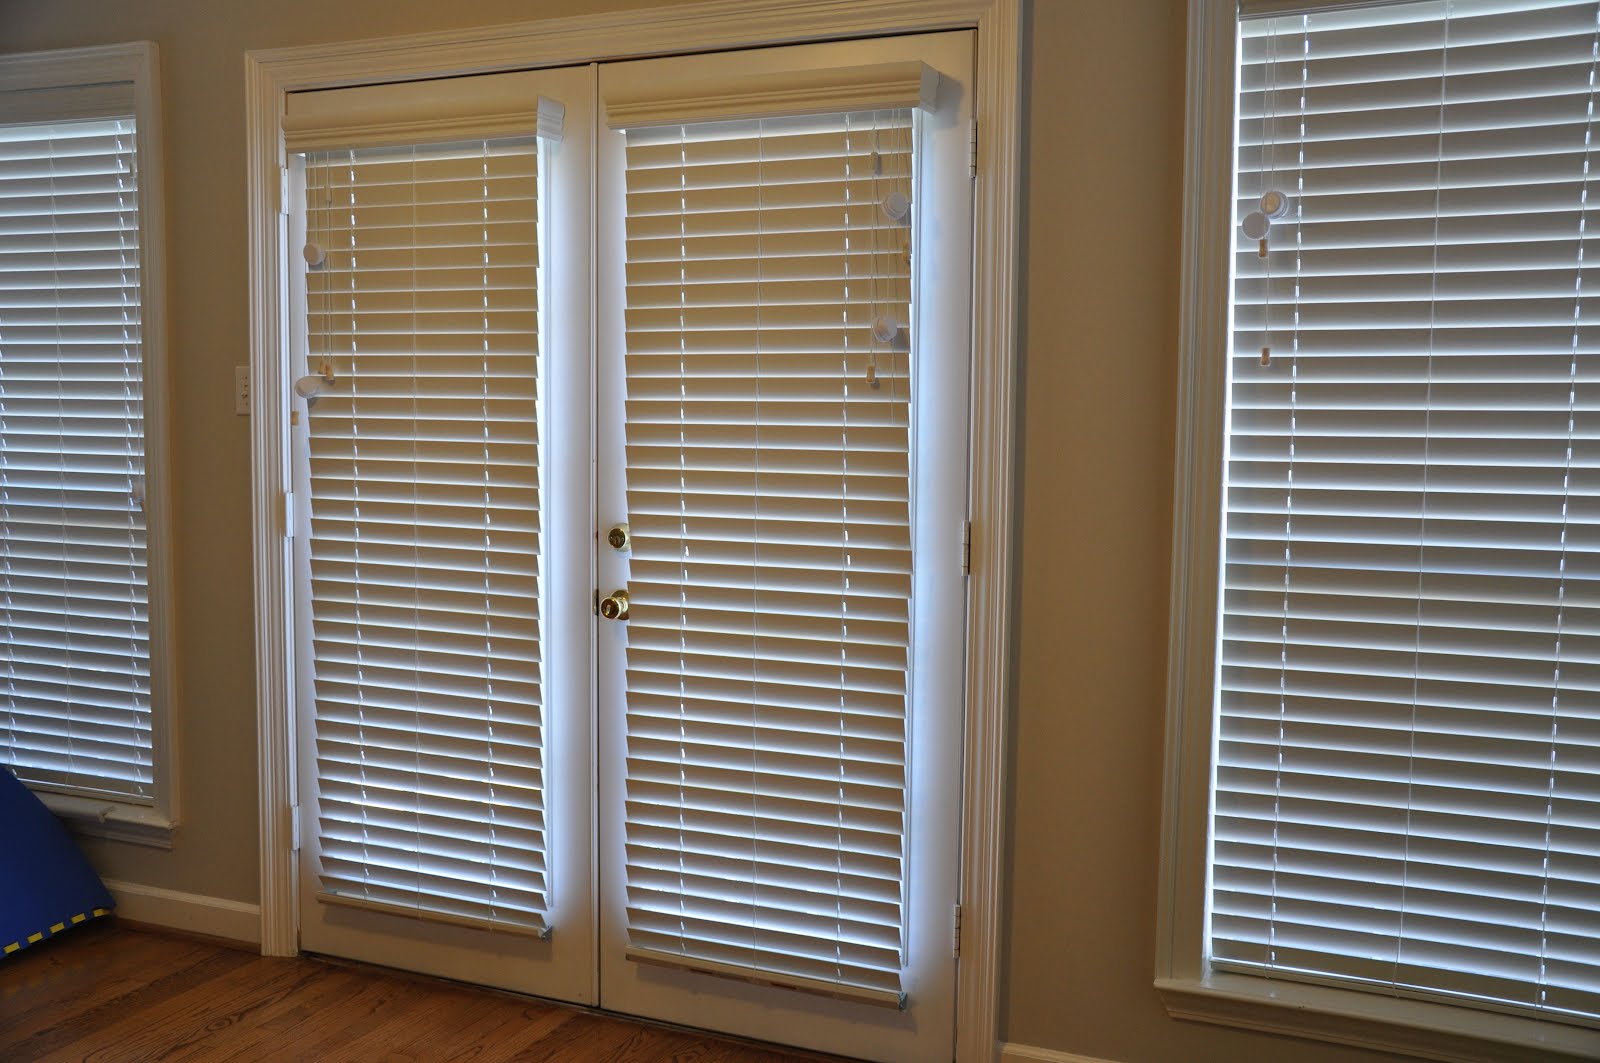  Blinds On French Doors Ideas for Large Space